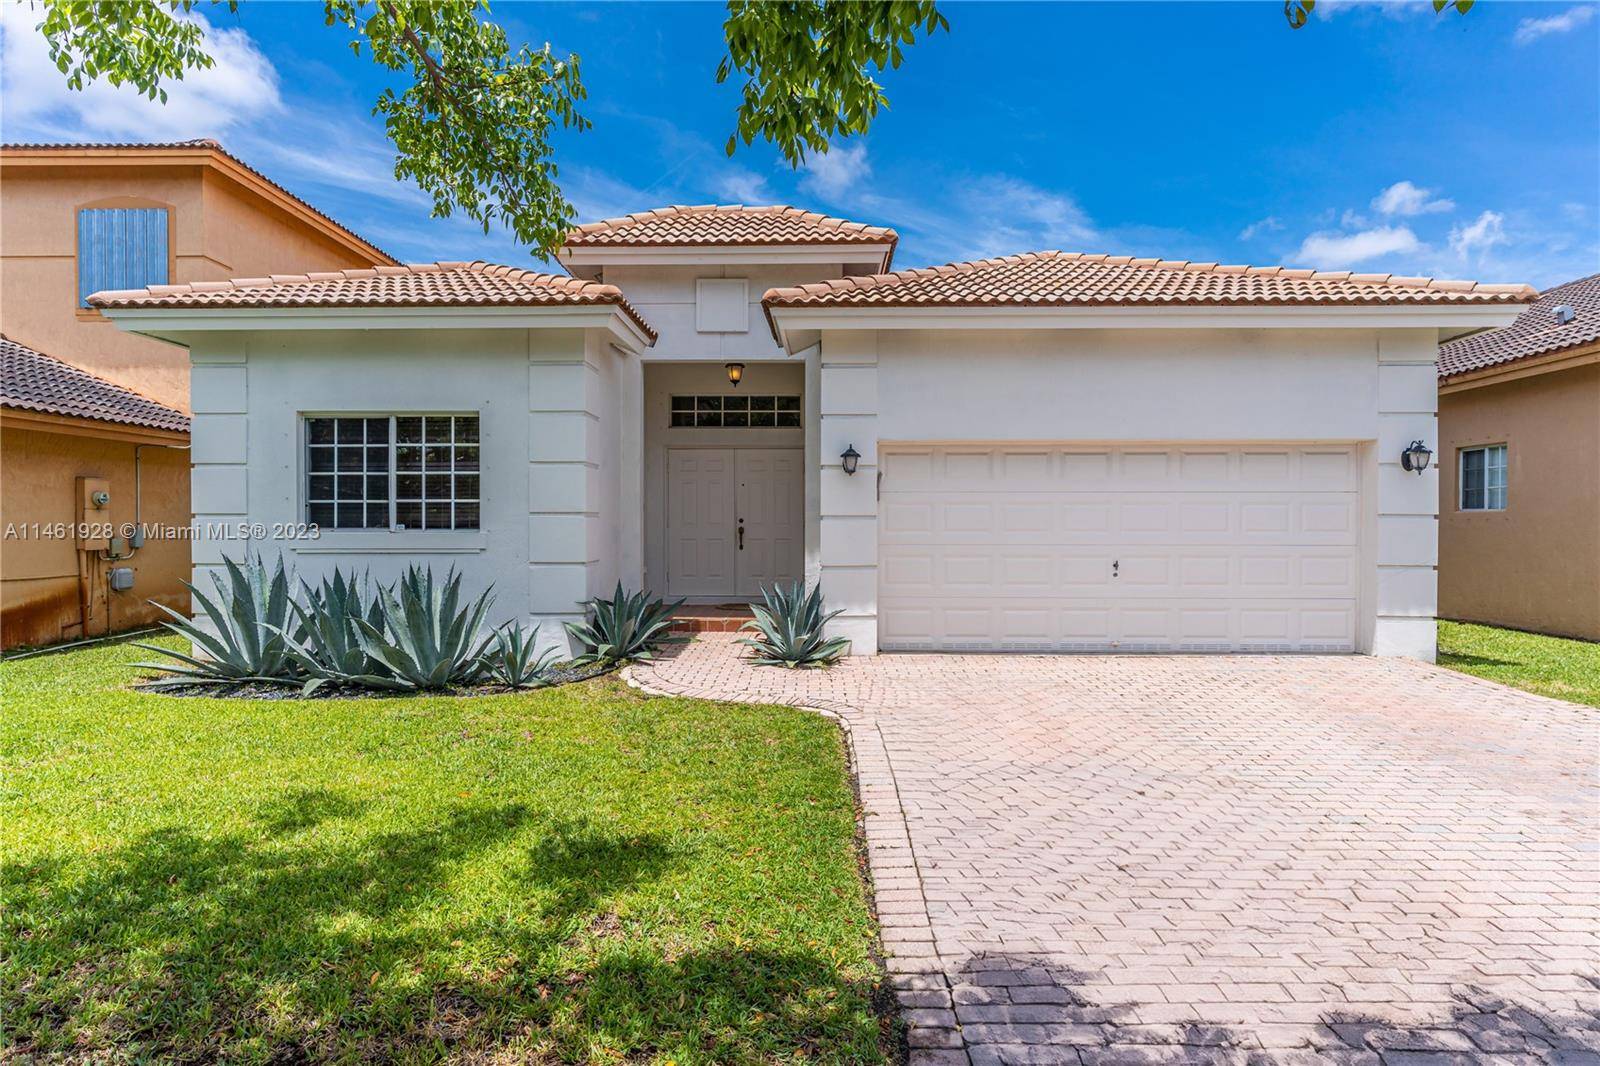 Look No Further ! This is a beautiful turnkey, move in ready Cutler Bay home !